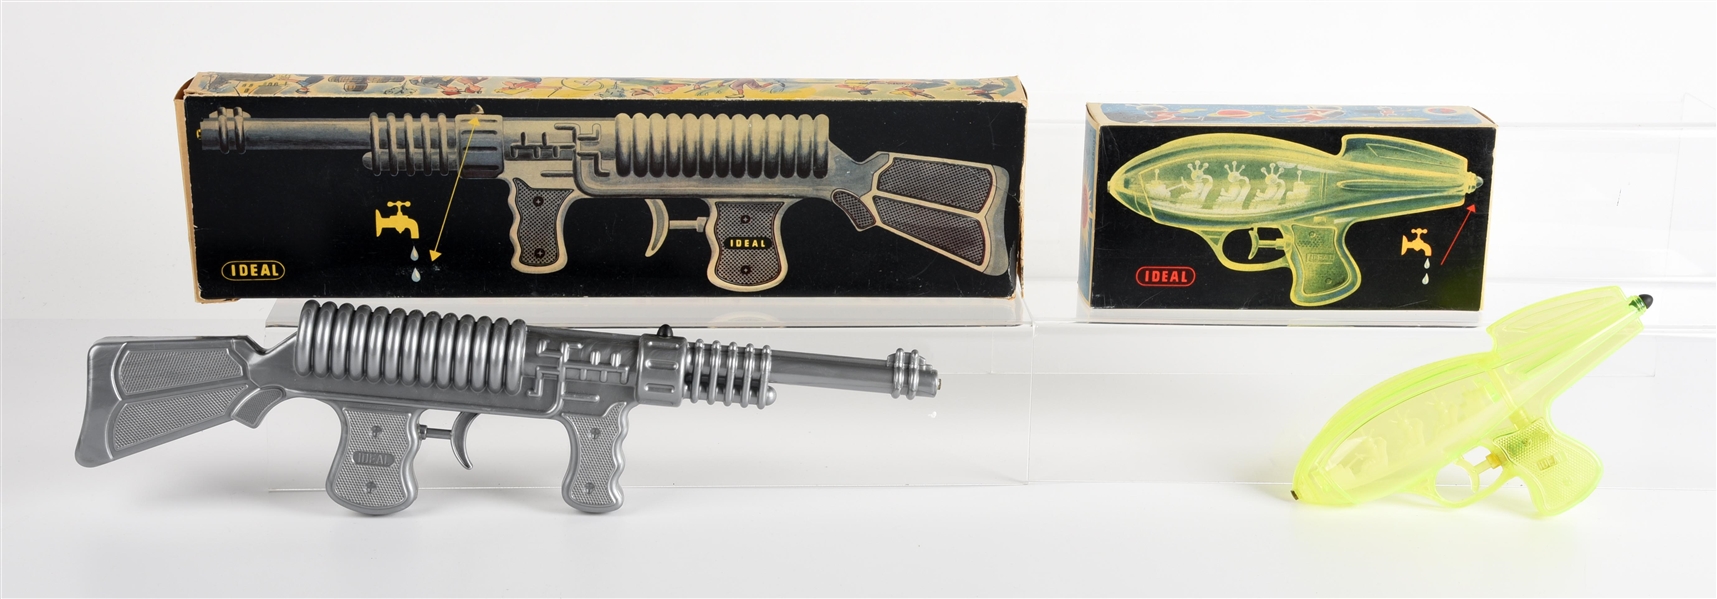 LOT OF 2: IDEAL PLASTIC SPACE GUNS IN ORIGINAL BOXES.